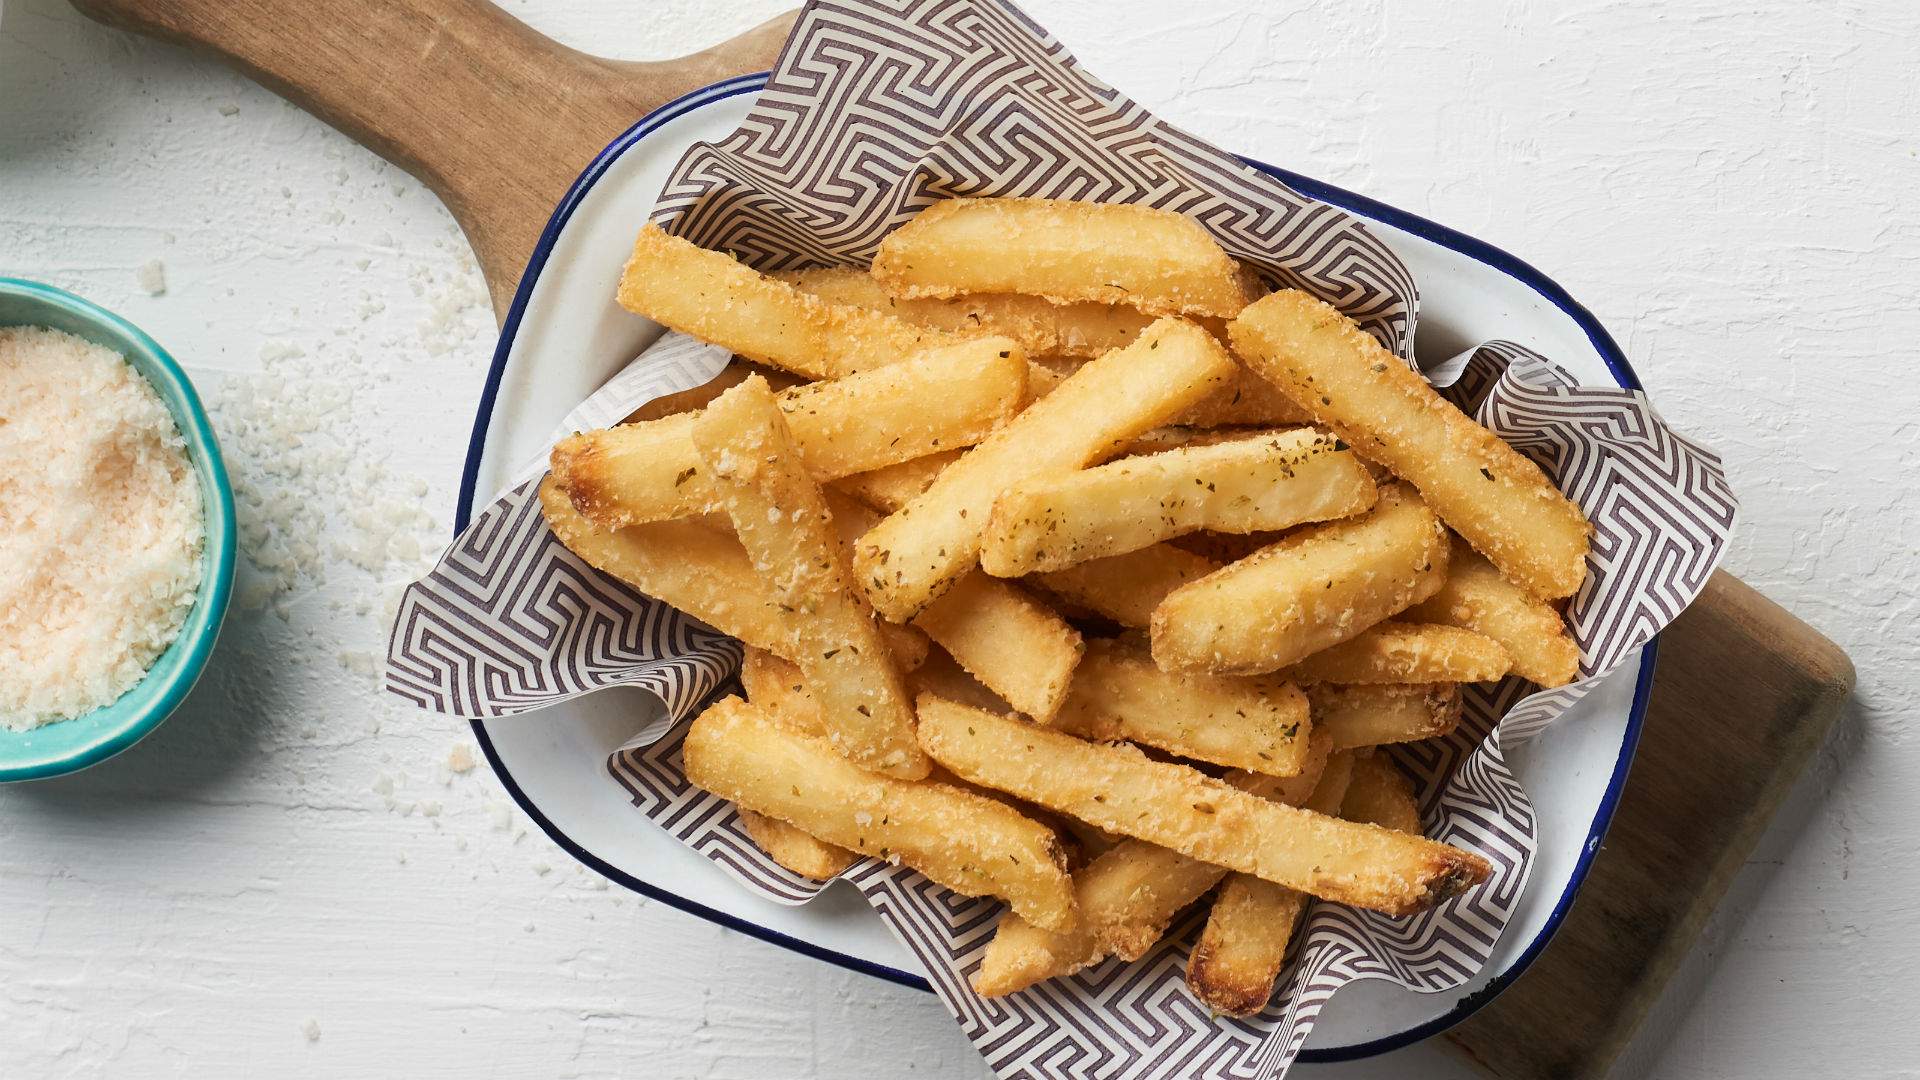 We're Giving Away a Year's Worth of Fries